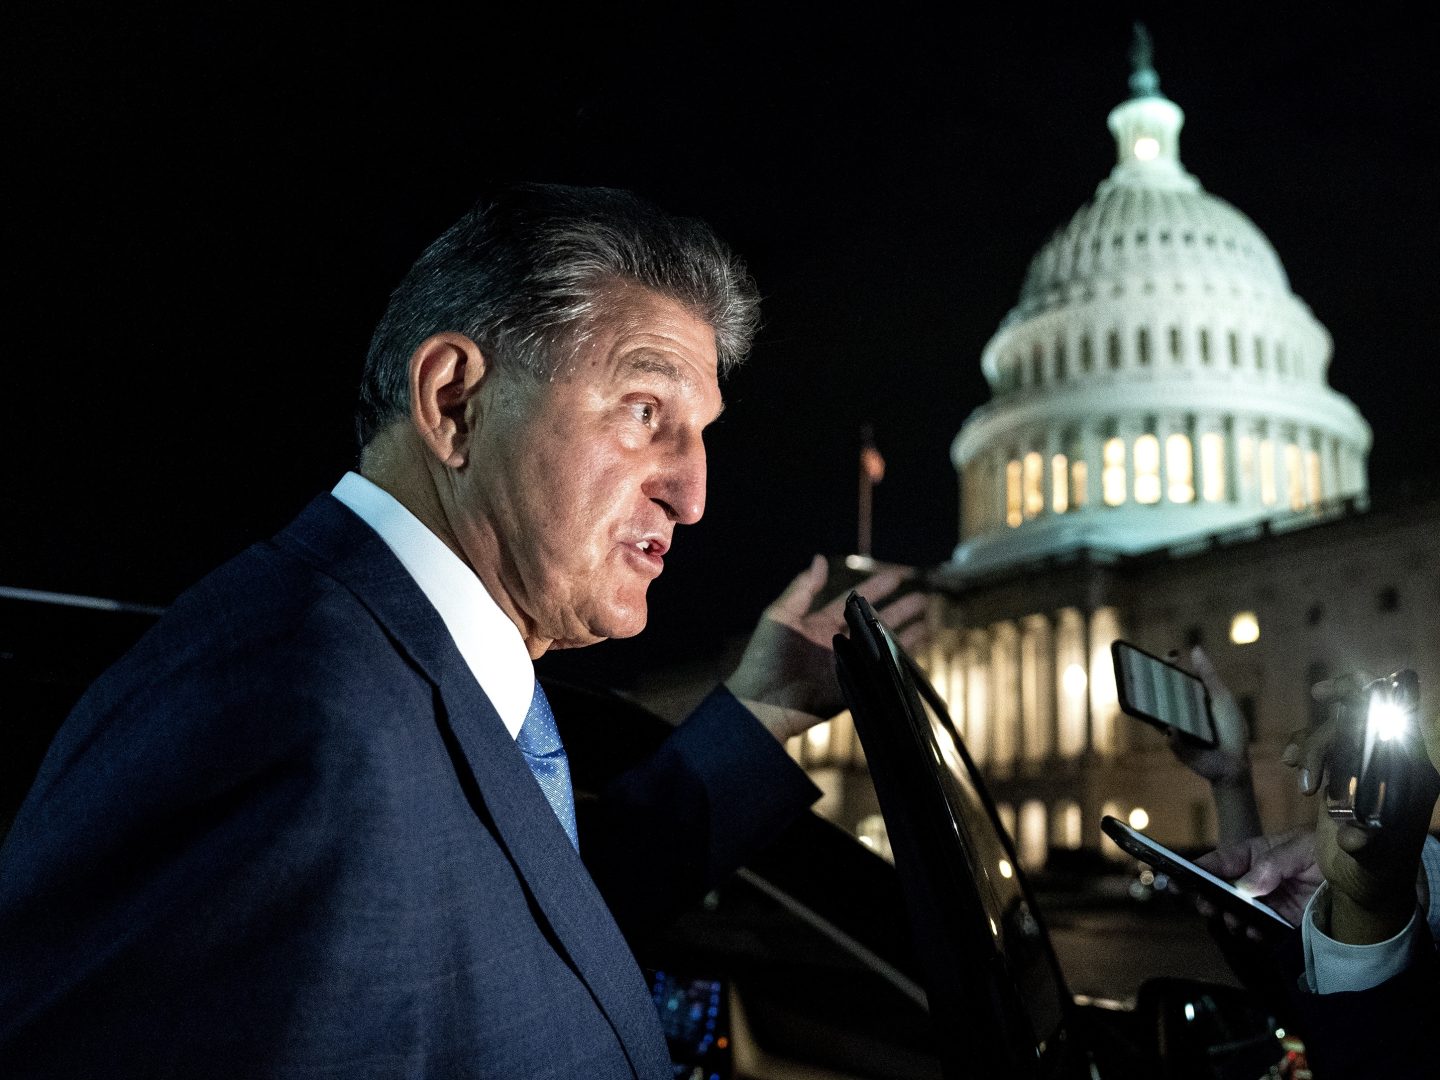 Senator Joe Manchin, a Democrat from West Virginia, speaks to members of the media while departing the U.S. Capitol in Washington, D.C., U.S., on Thursday, Oct. 7, 2021.  Stefani Reynolds/Bloomberg via Getty Images